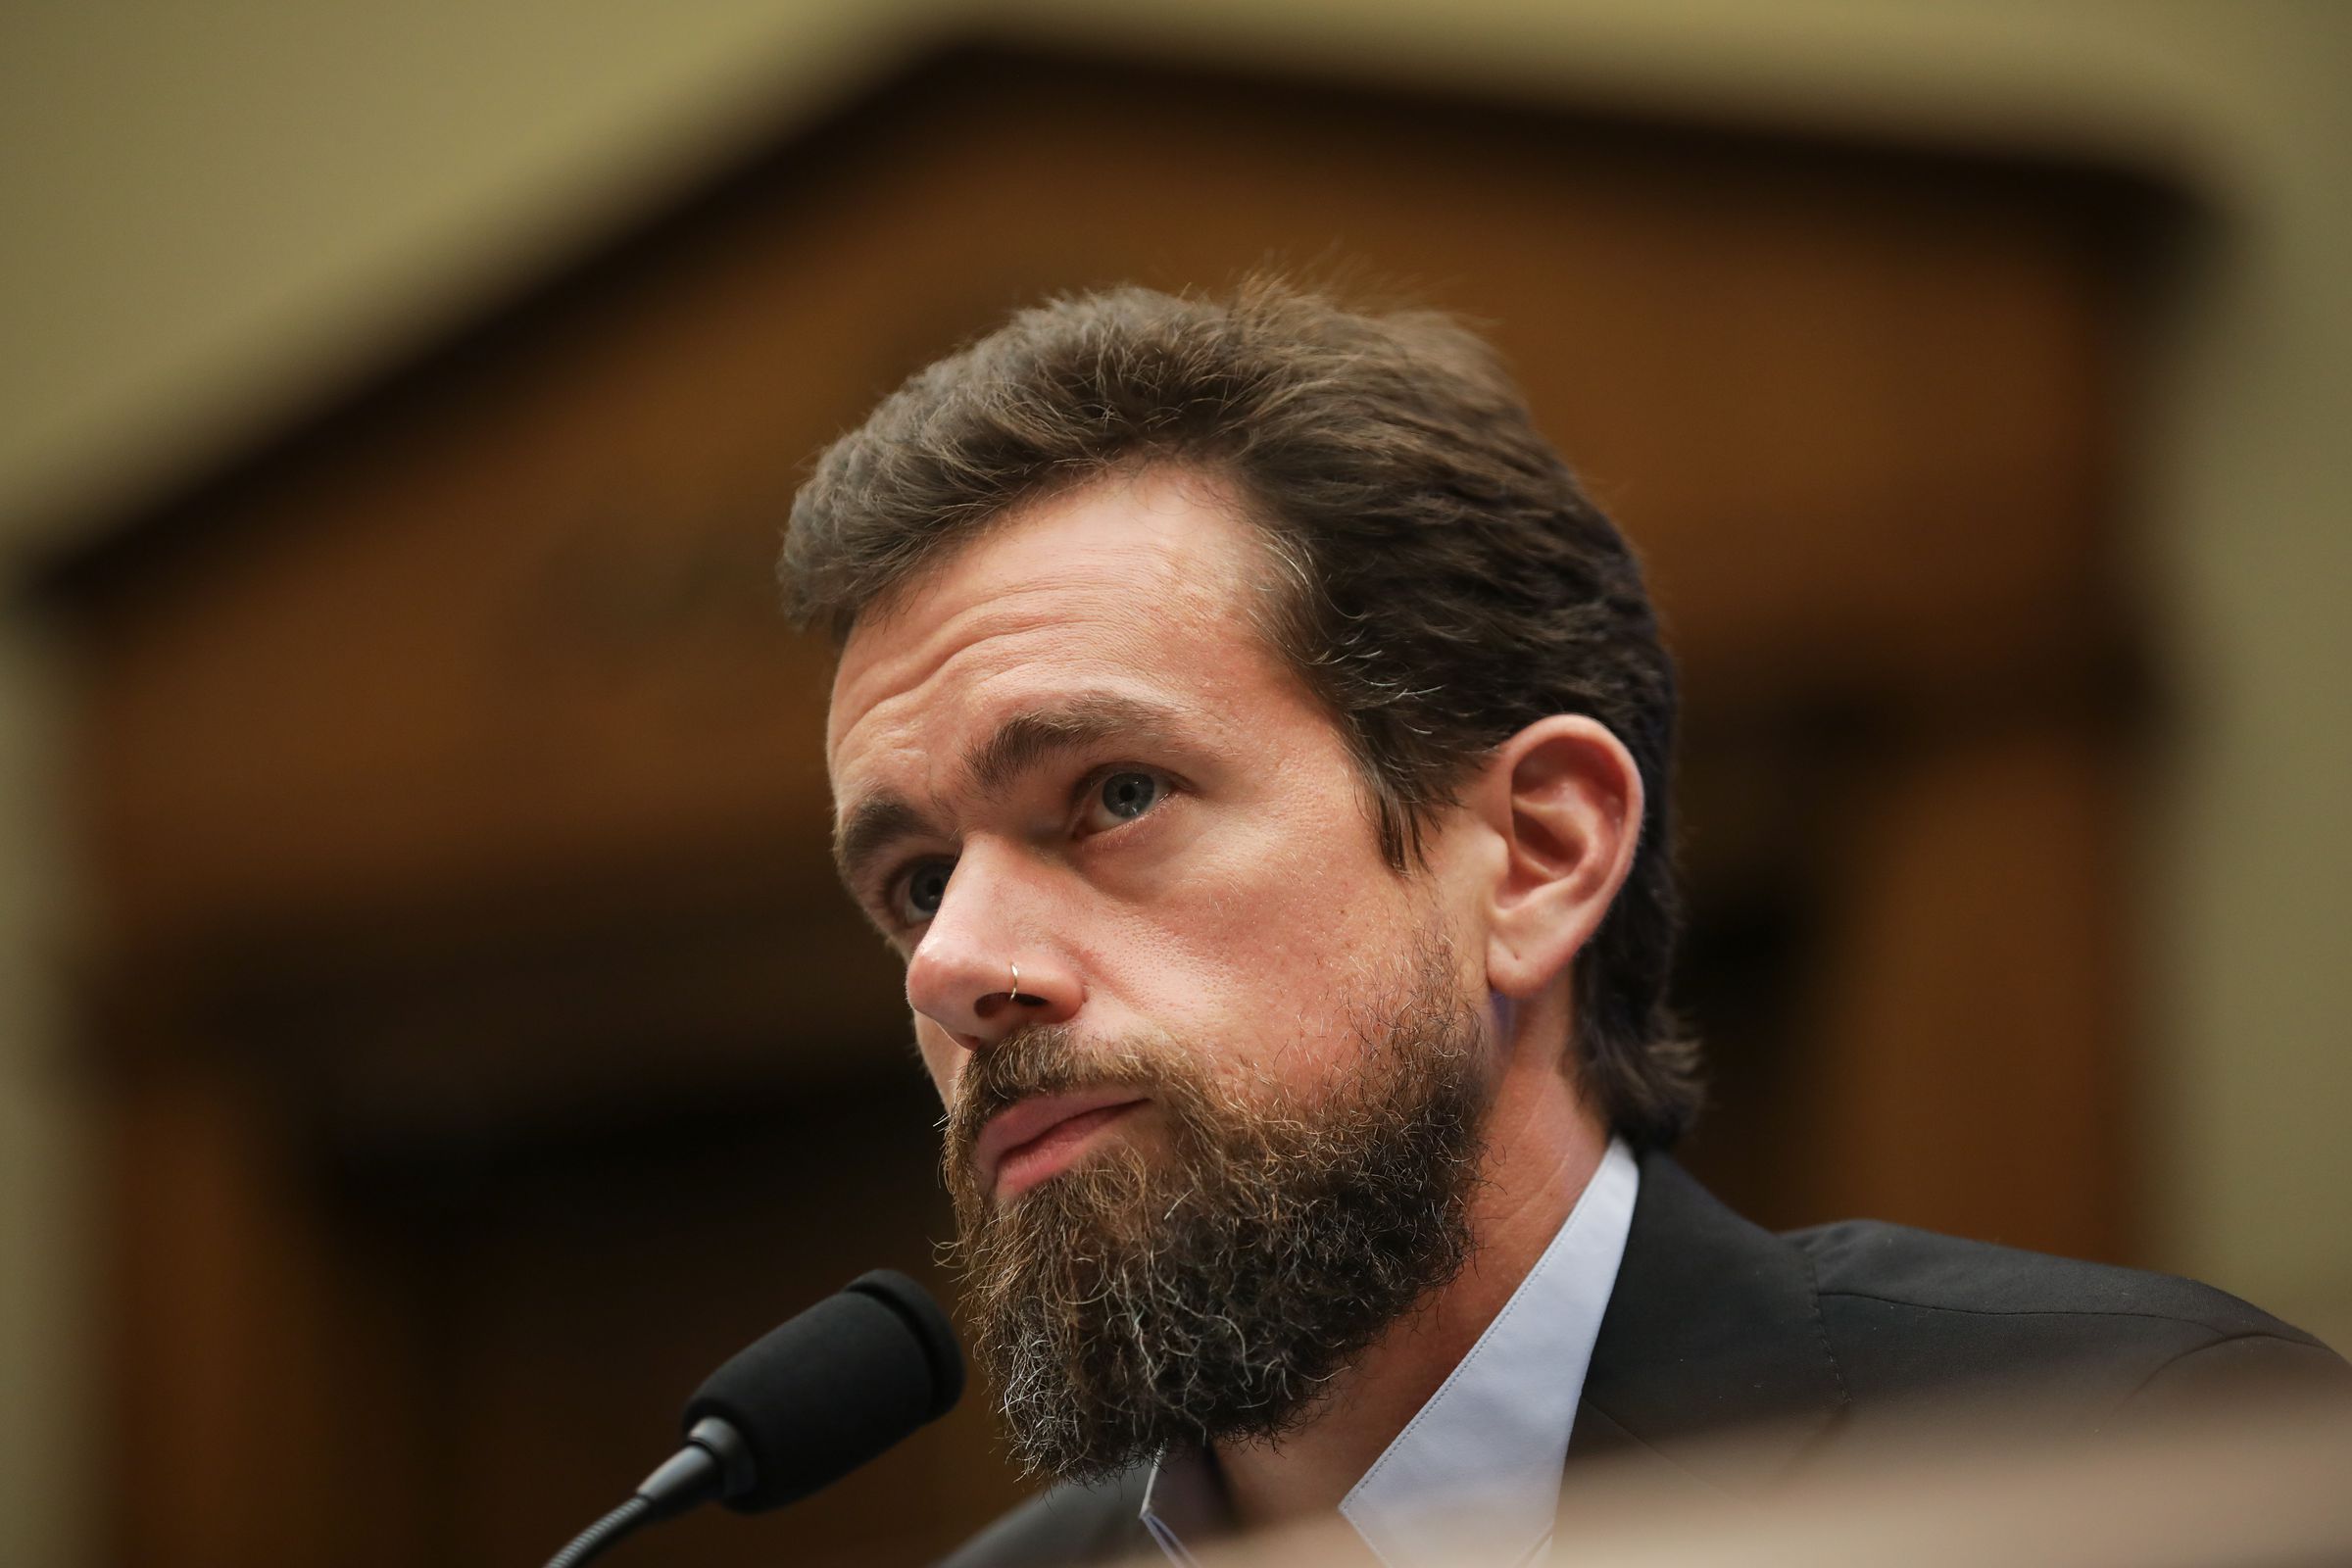 Twitter CEO Jack Dorsey Testifies To House Hearing On Company’s Transparency and Accountability